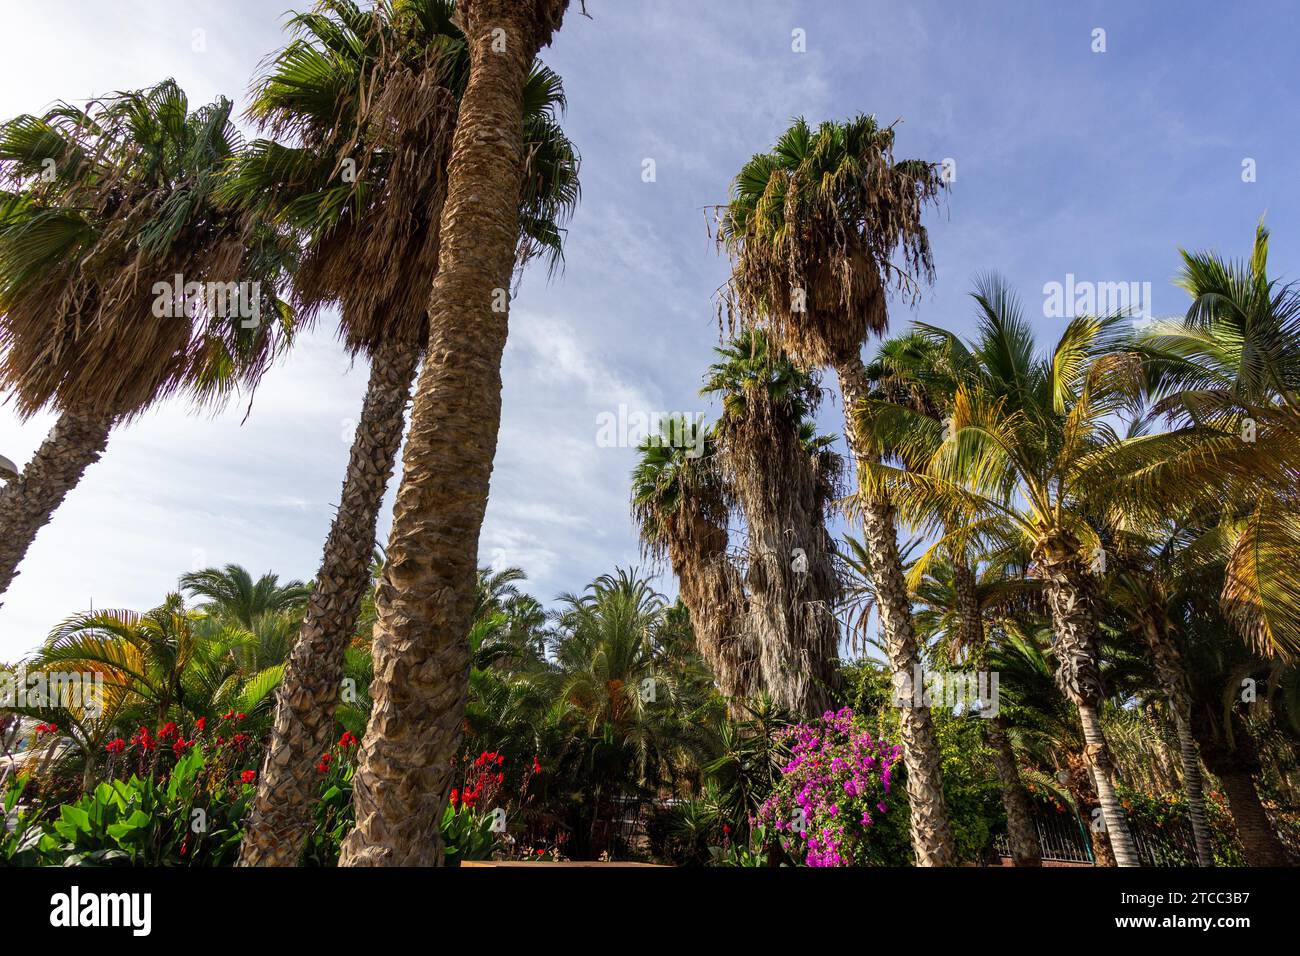 Garden with palm trees and plants with red and purple blossoms in Morro Jable on canary island Fuerteventura, Spain Stock Photo